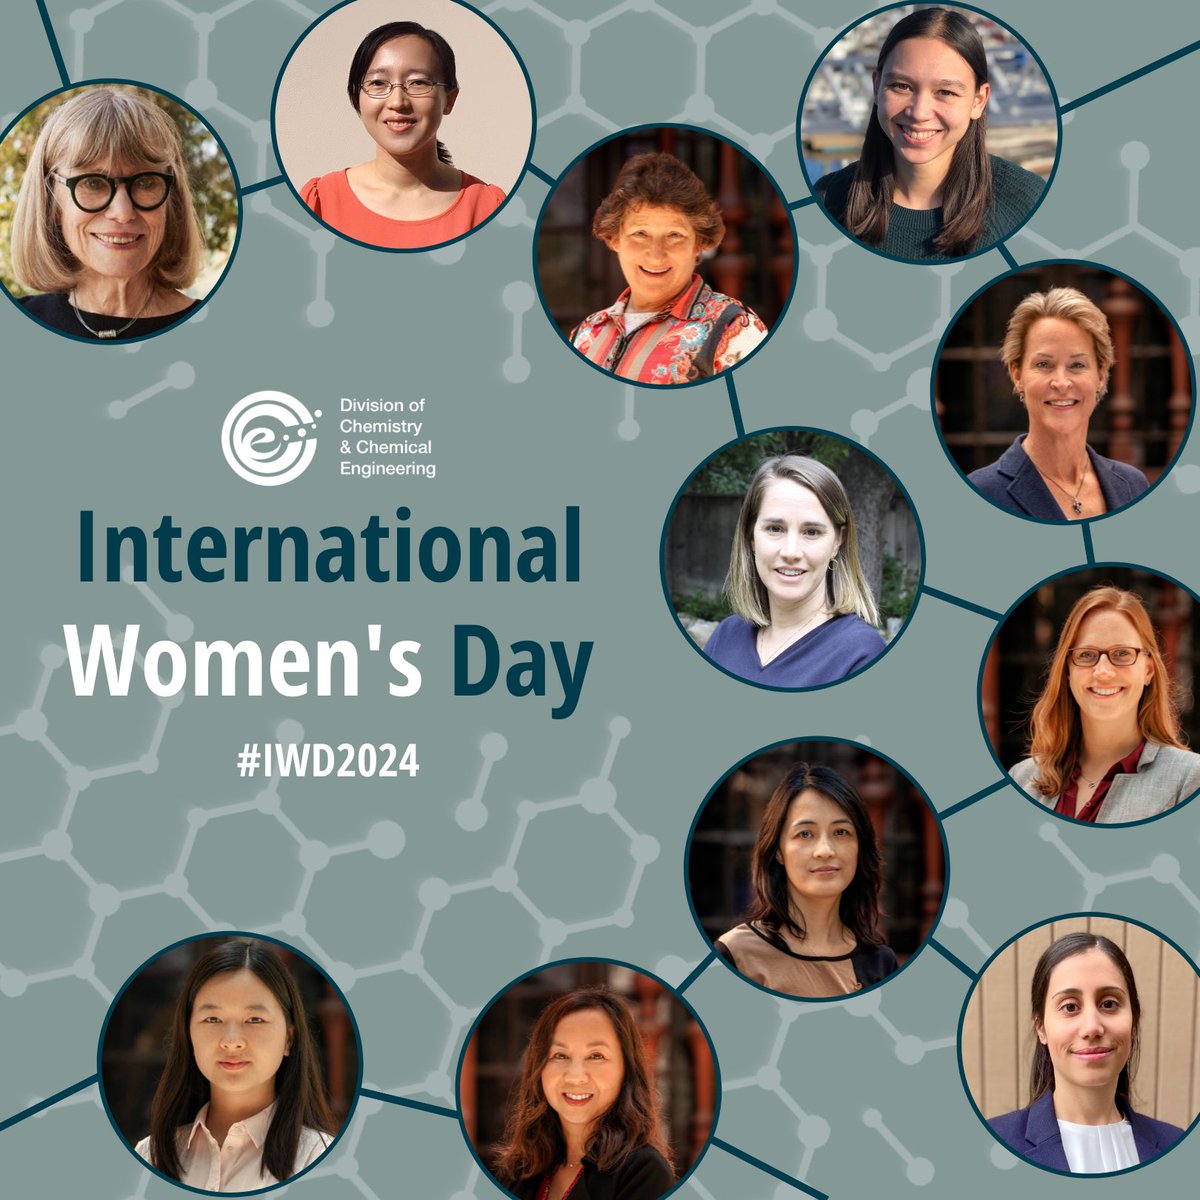 On International Women’s Day, join us in celebrating our incredible faculty for their contributions to CCE and the field of chemistry and chemical engineering! You’ve made #STEM a more inclusive place for all scientists. #IWD2024 👩‍🔬